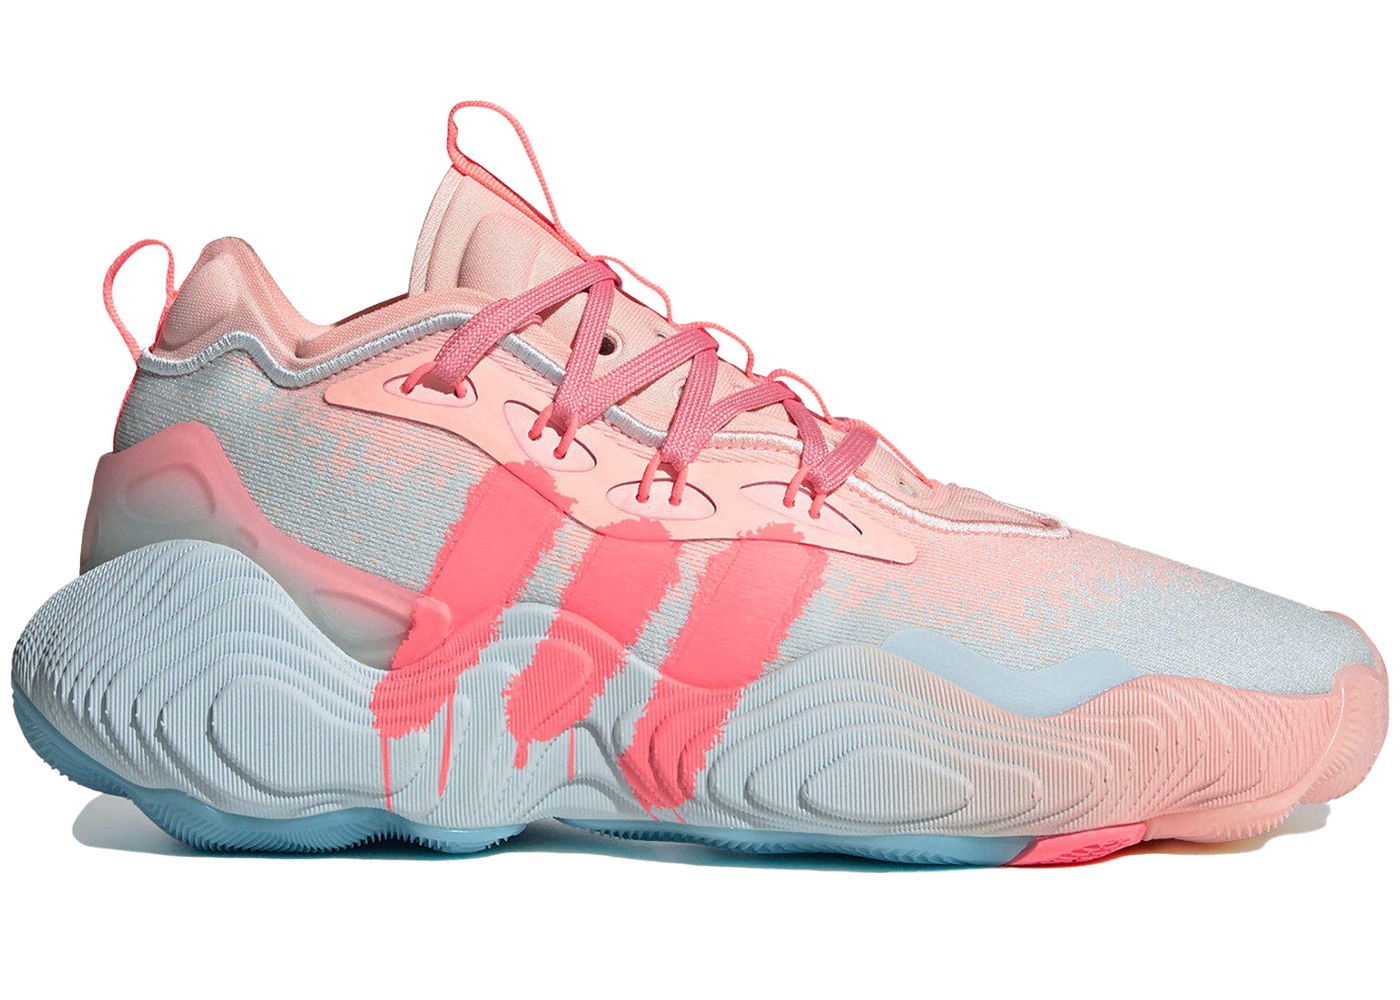 adidas Trae Young 3 Cotton Candy メンズ - IF9358 - JP